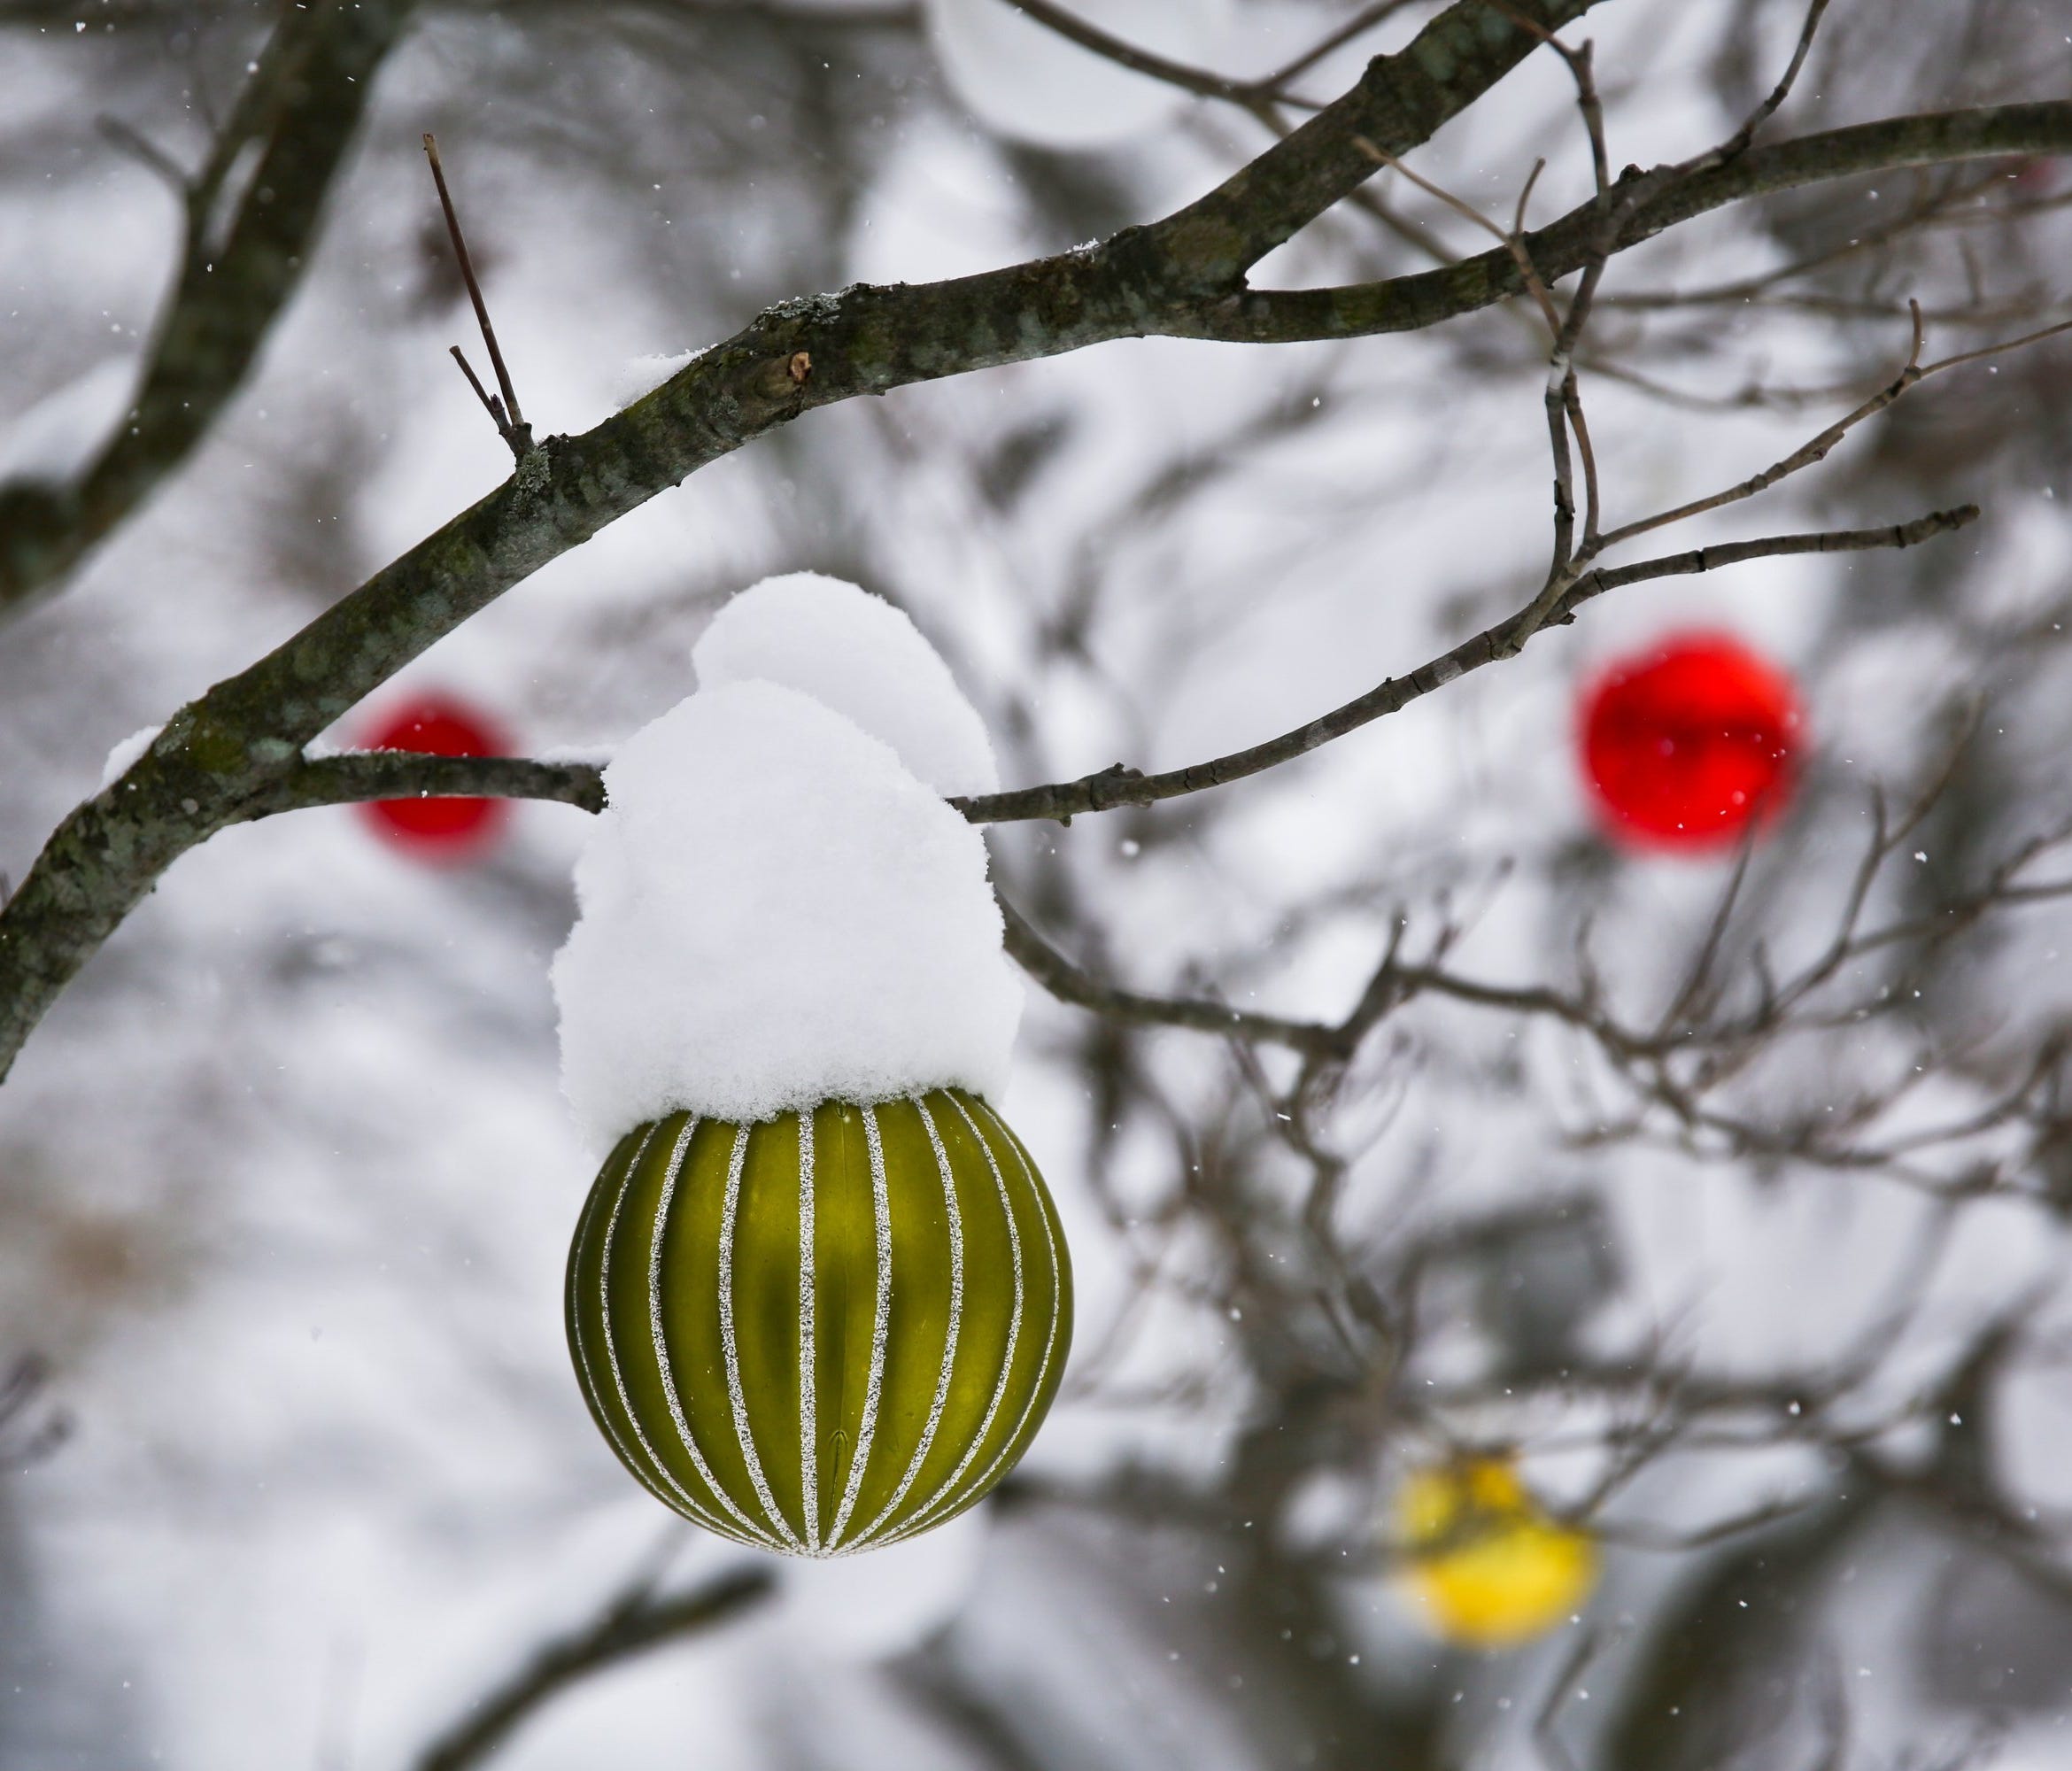 Christmas ornaments hang on a tree in Kalamazoo, Mich., in this 2016 file photo.